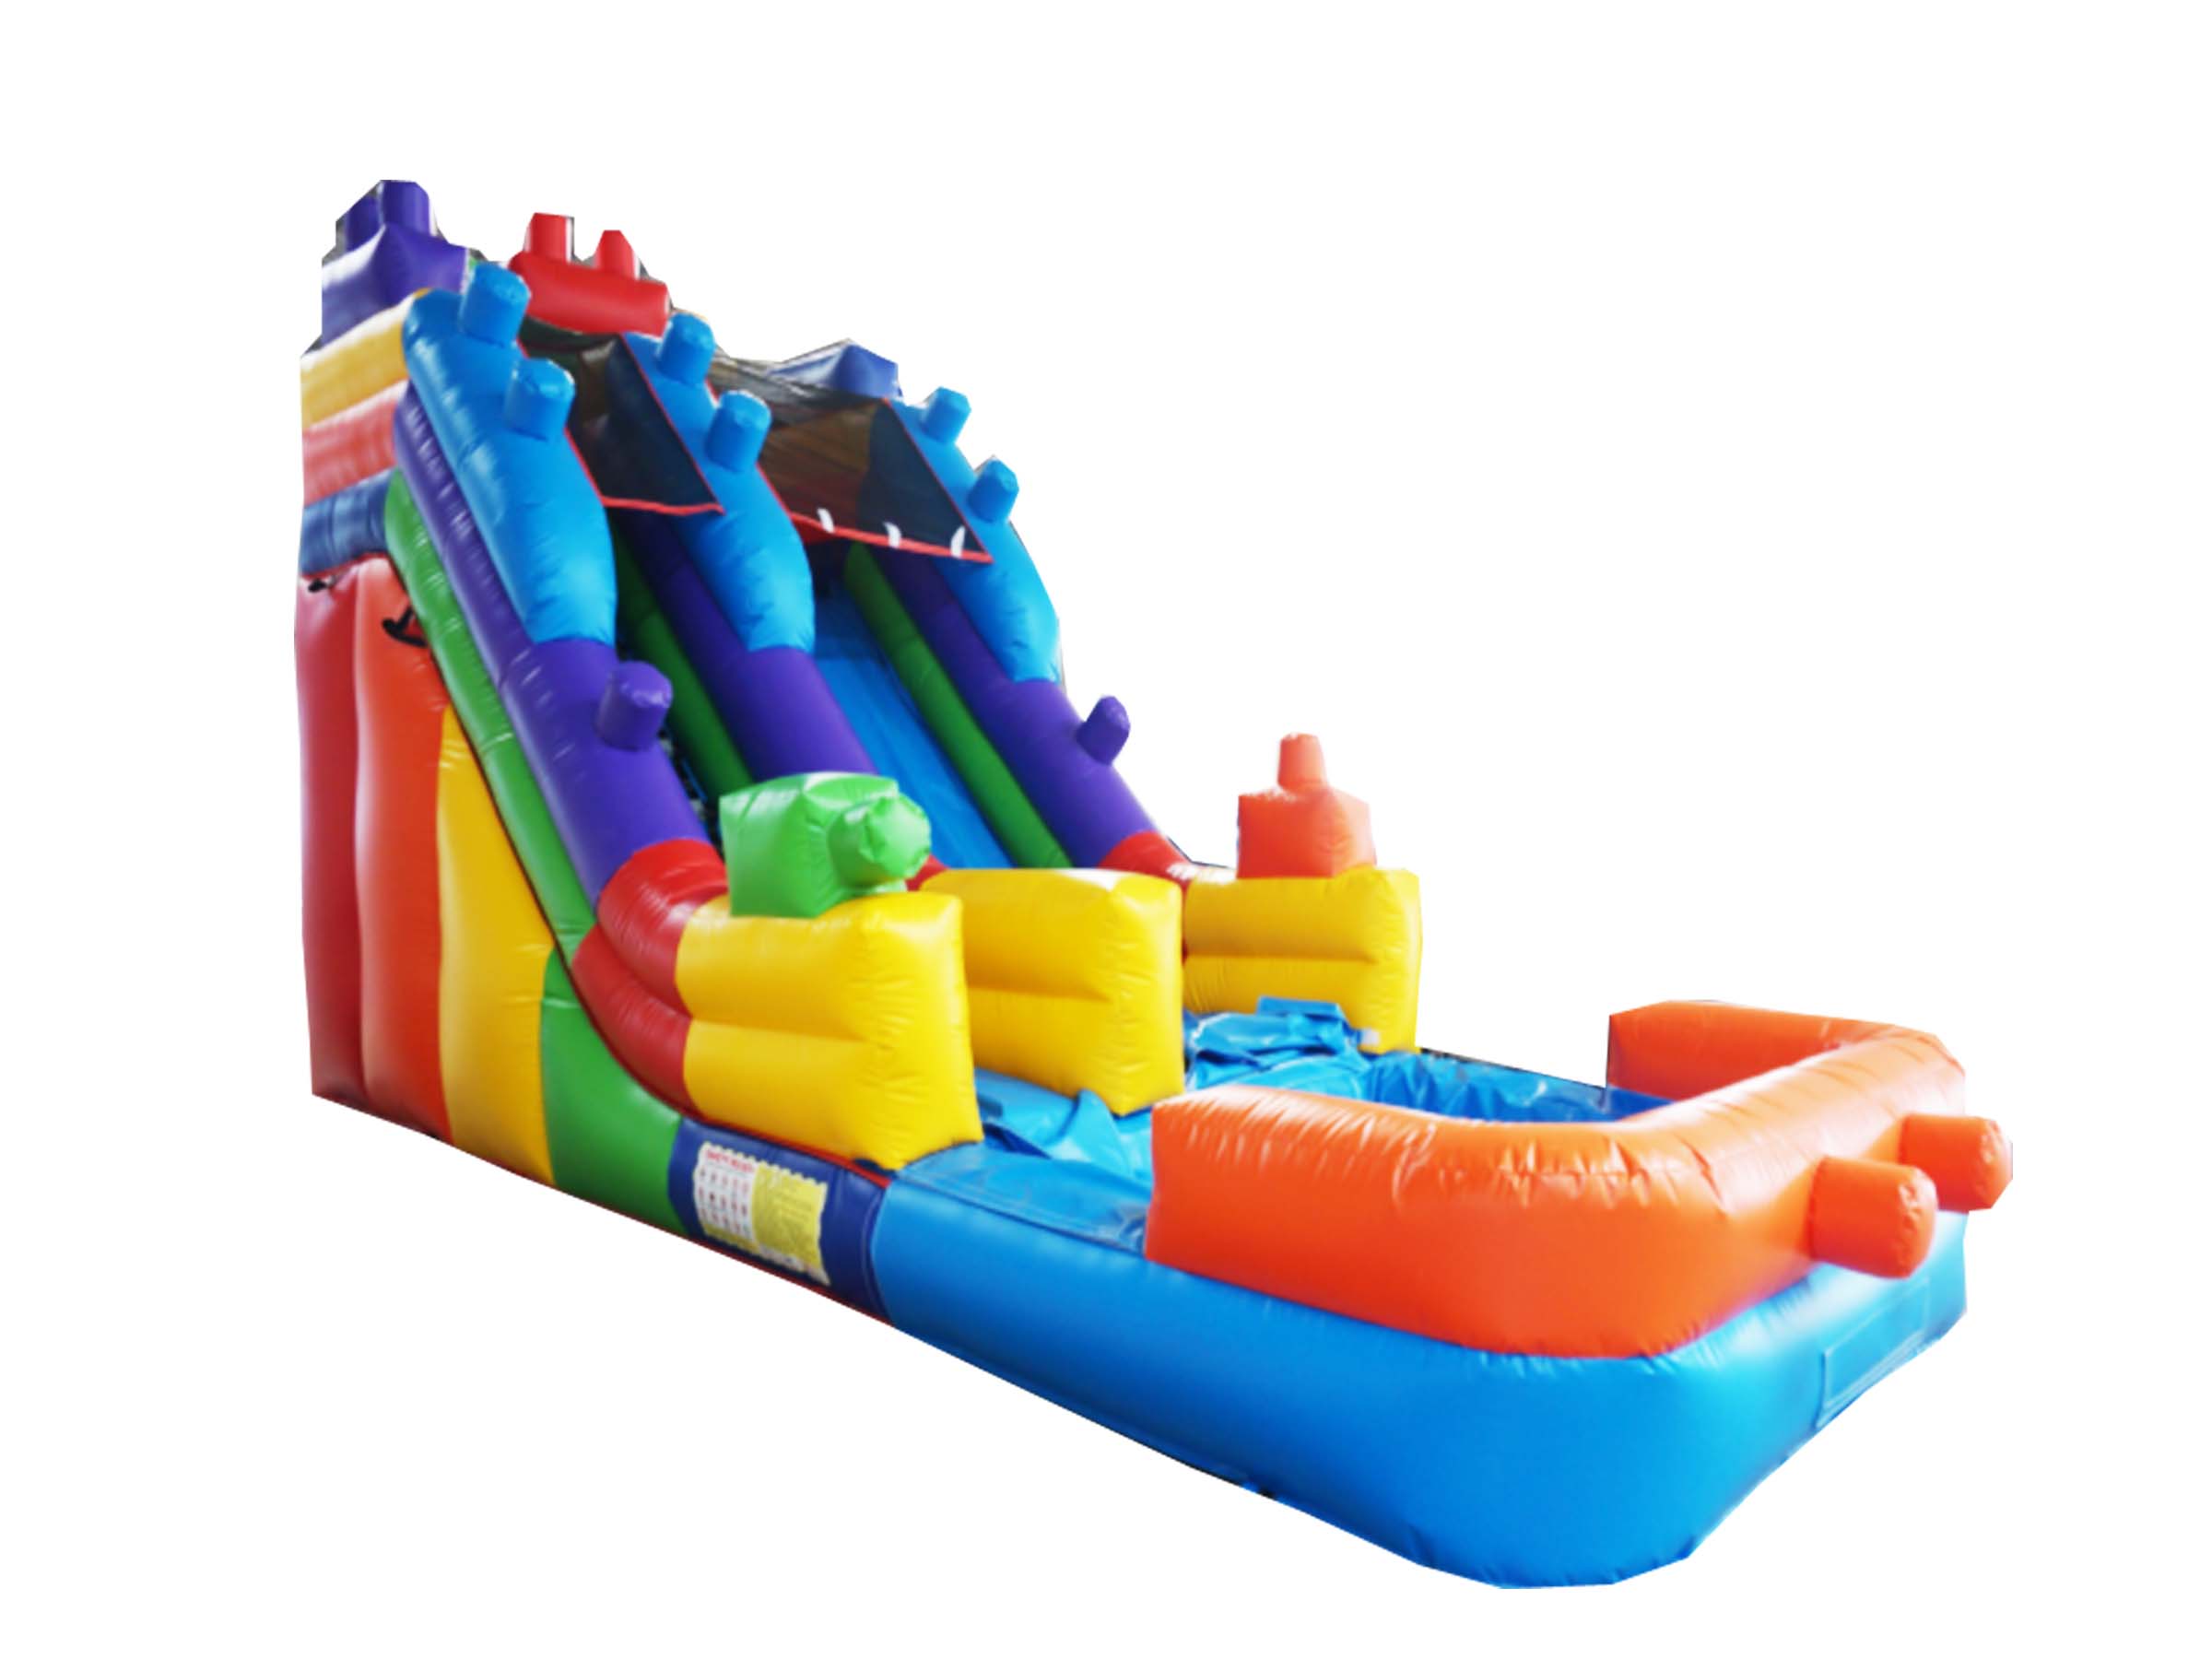 Lego Bounce house and Water Slide Rental - Maxinflables Inc